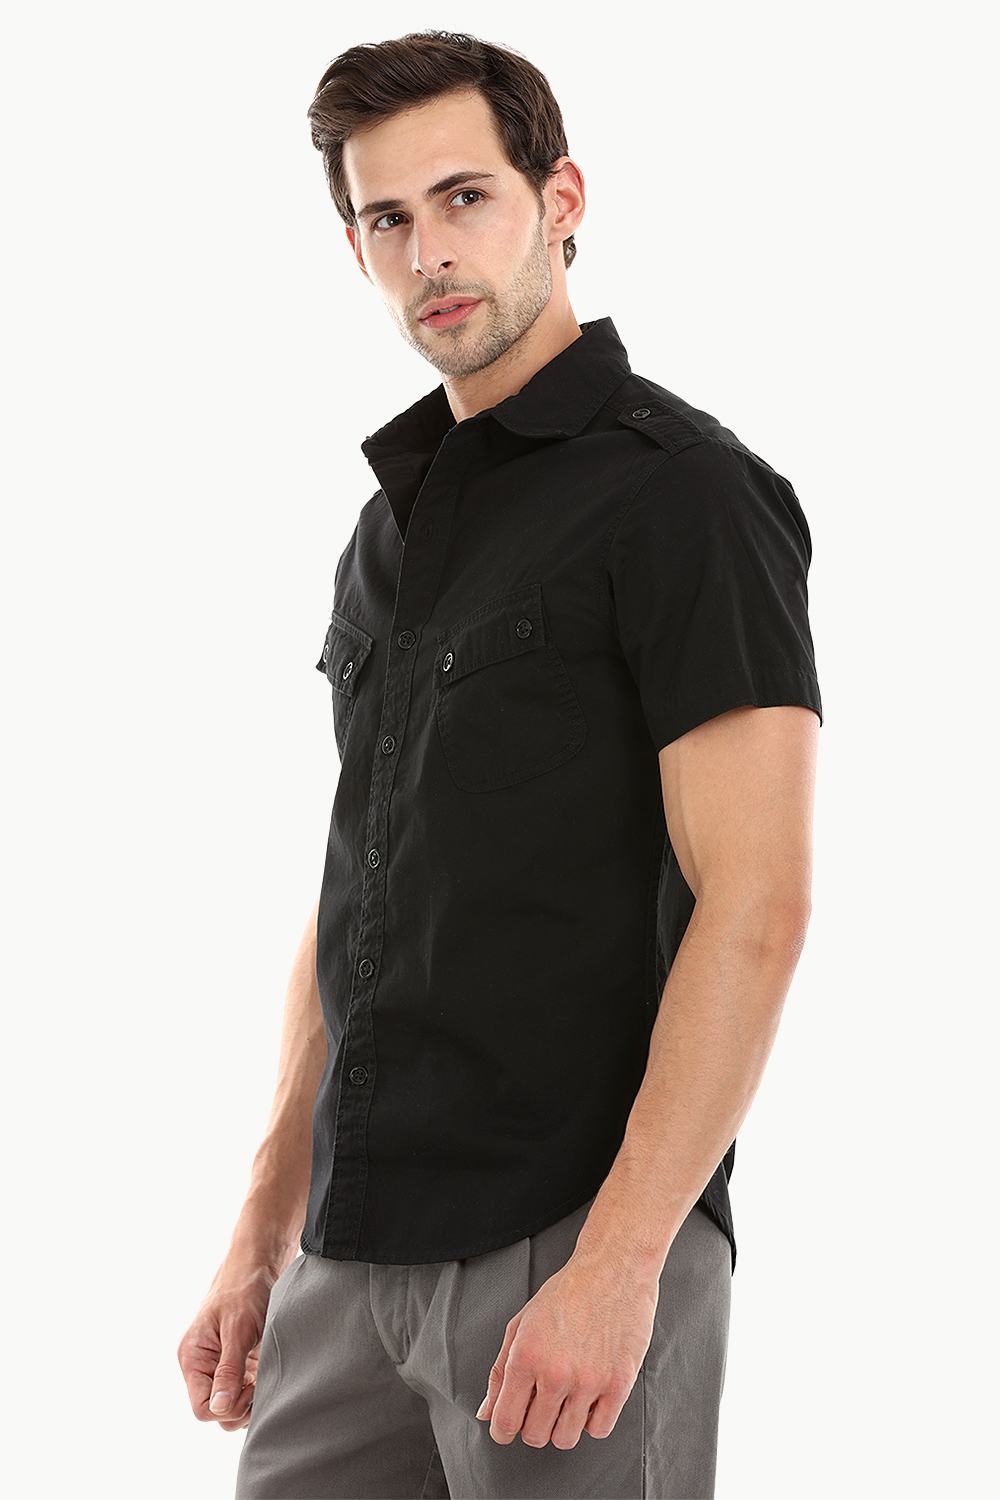 Buy Online Military Style Twill Shirt With Epaulets for Men at Zobello